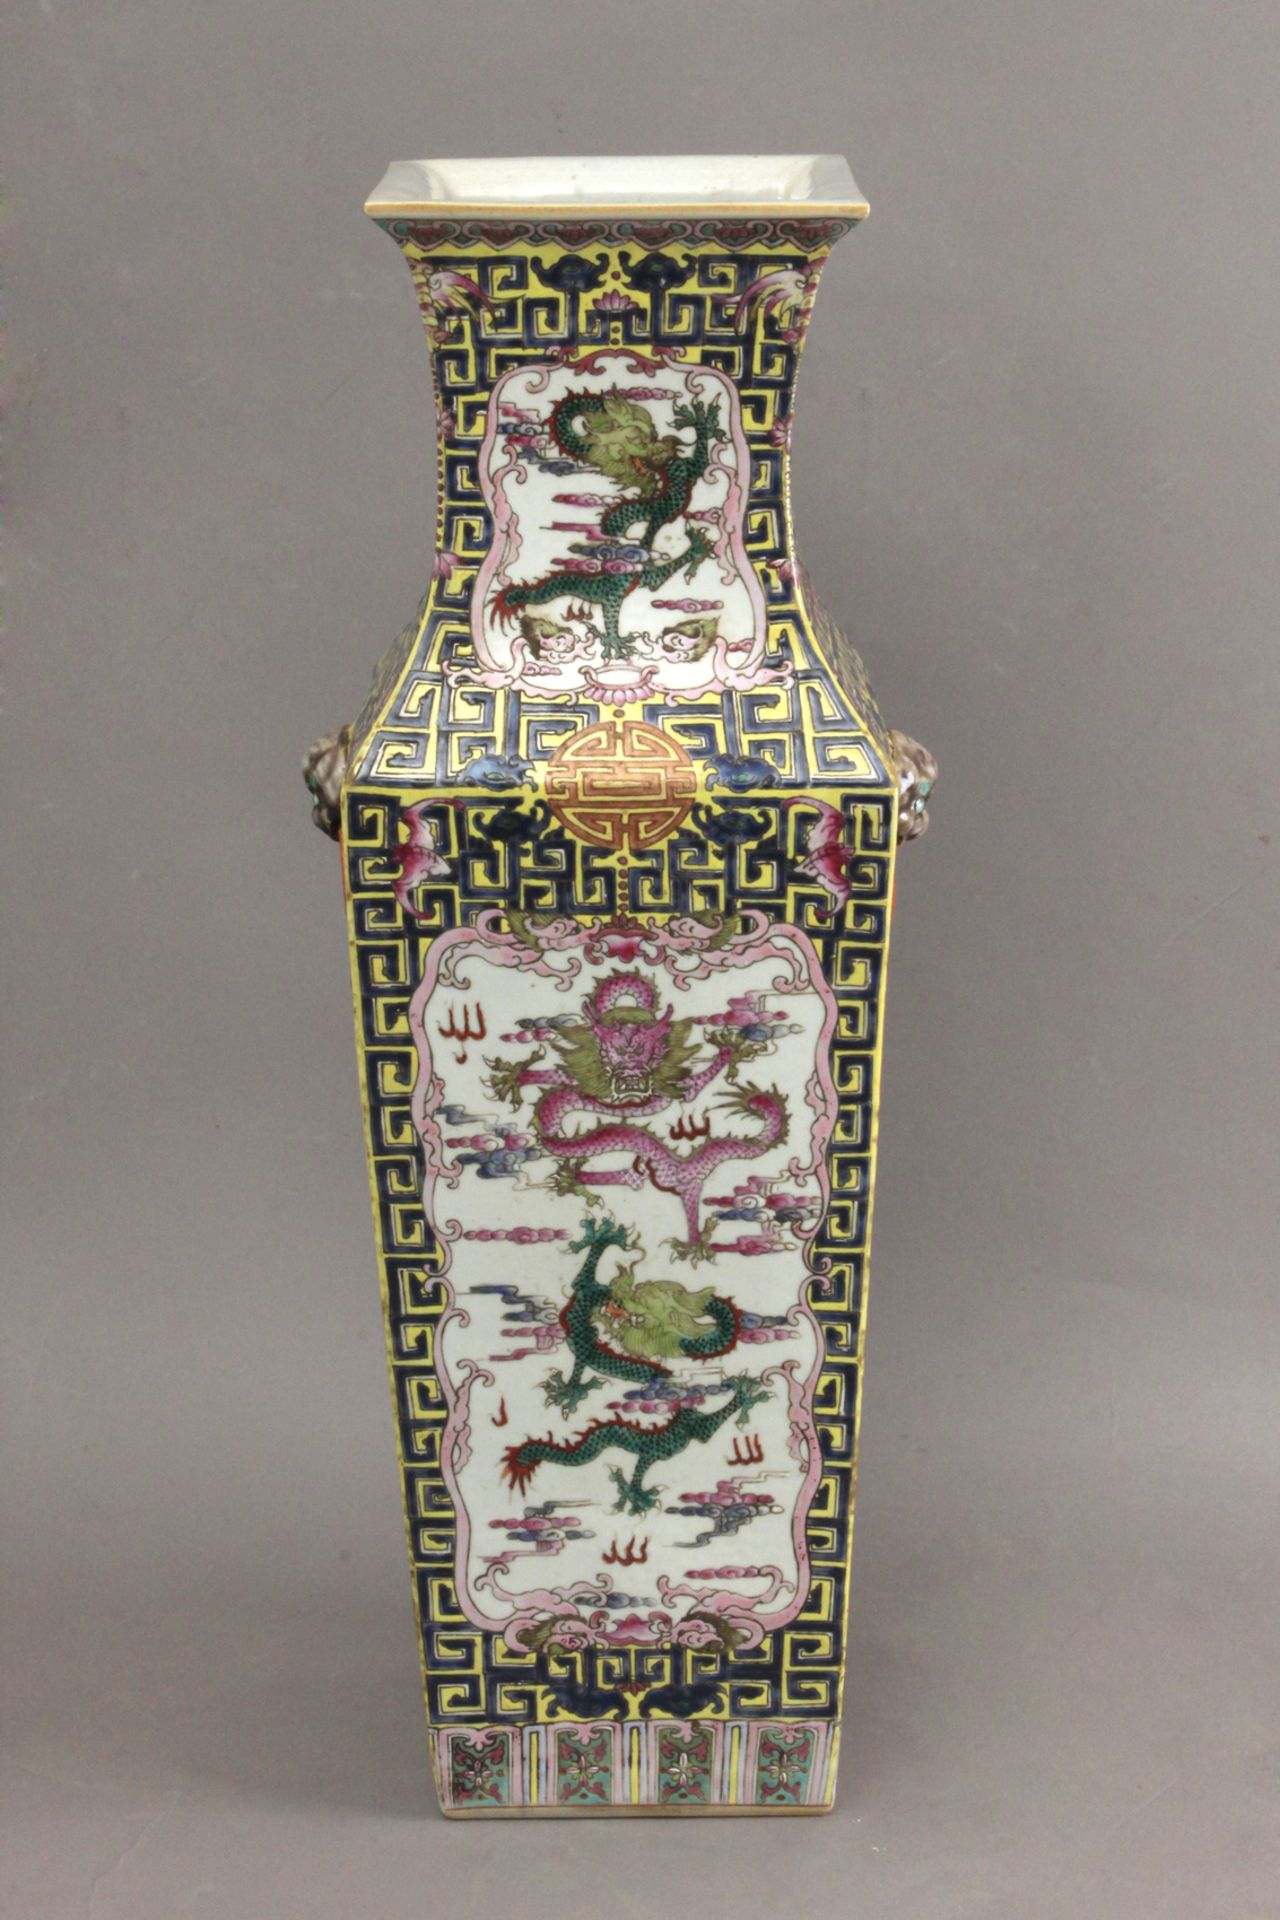 A 20th century Chinese square vase in Famille Rose porcelain